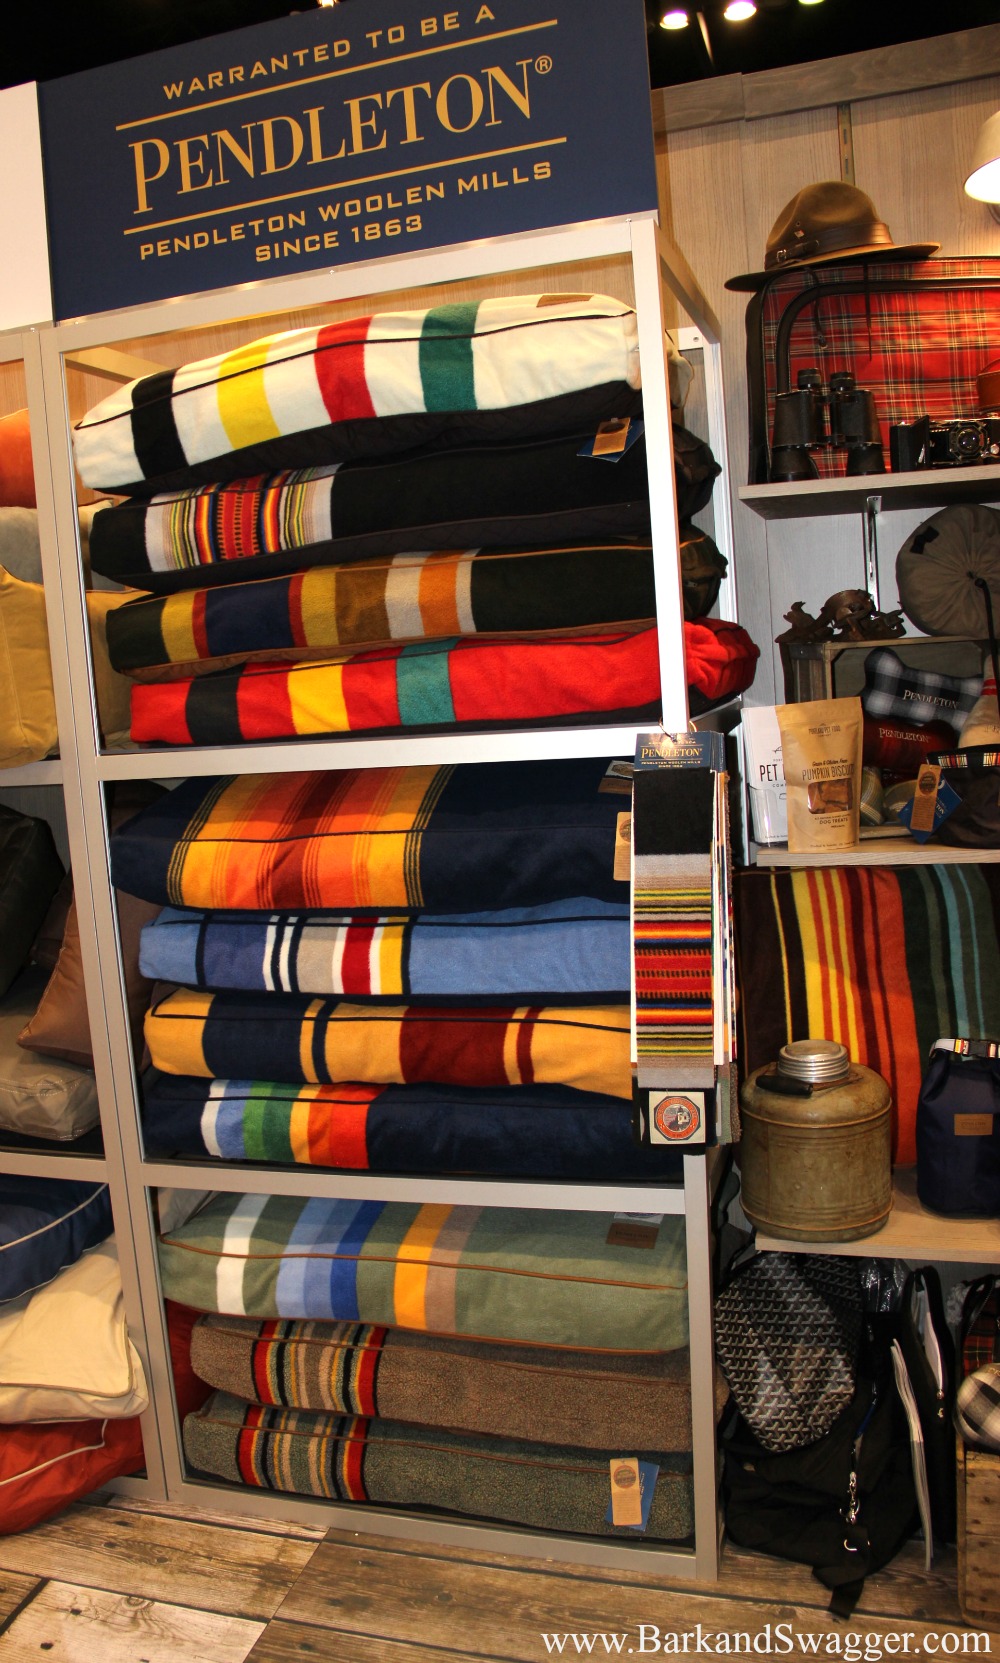 Dogs with style and their parents would love these products. Beautiful Pendleton dog beds, coats and more. Wow. 